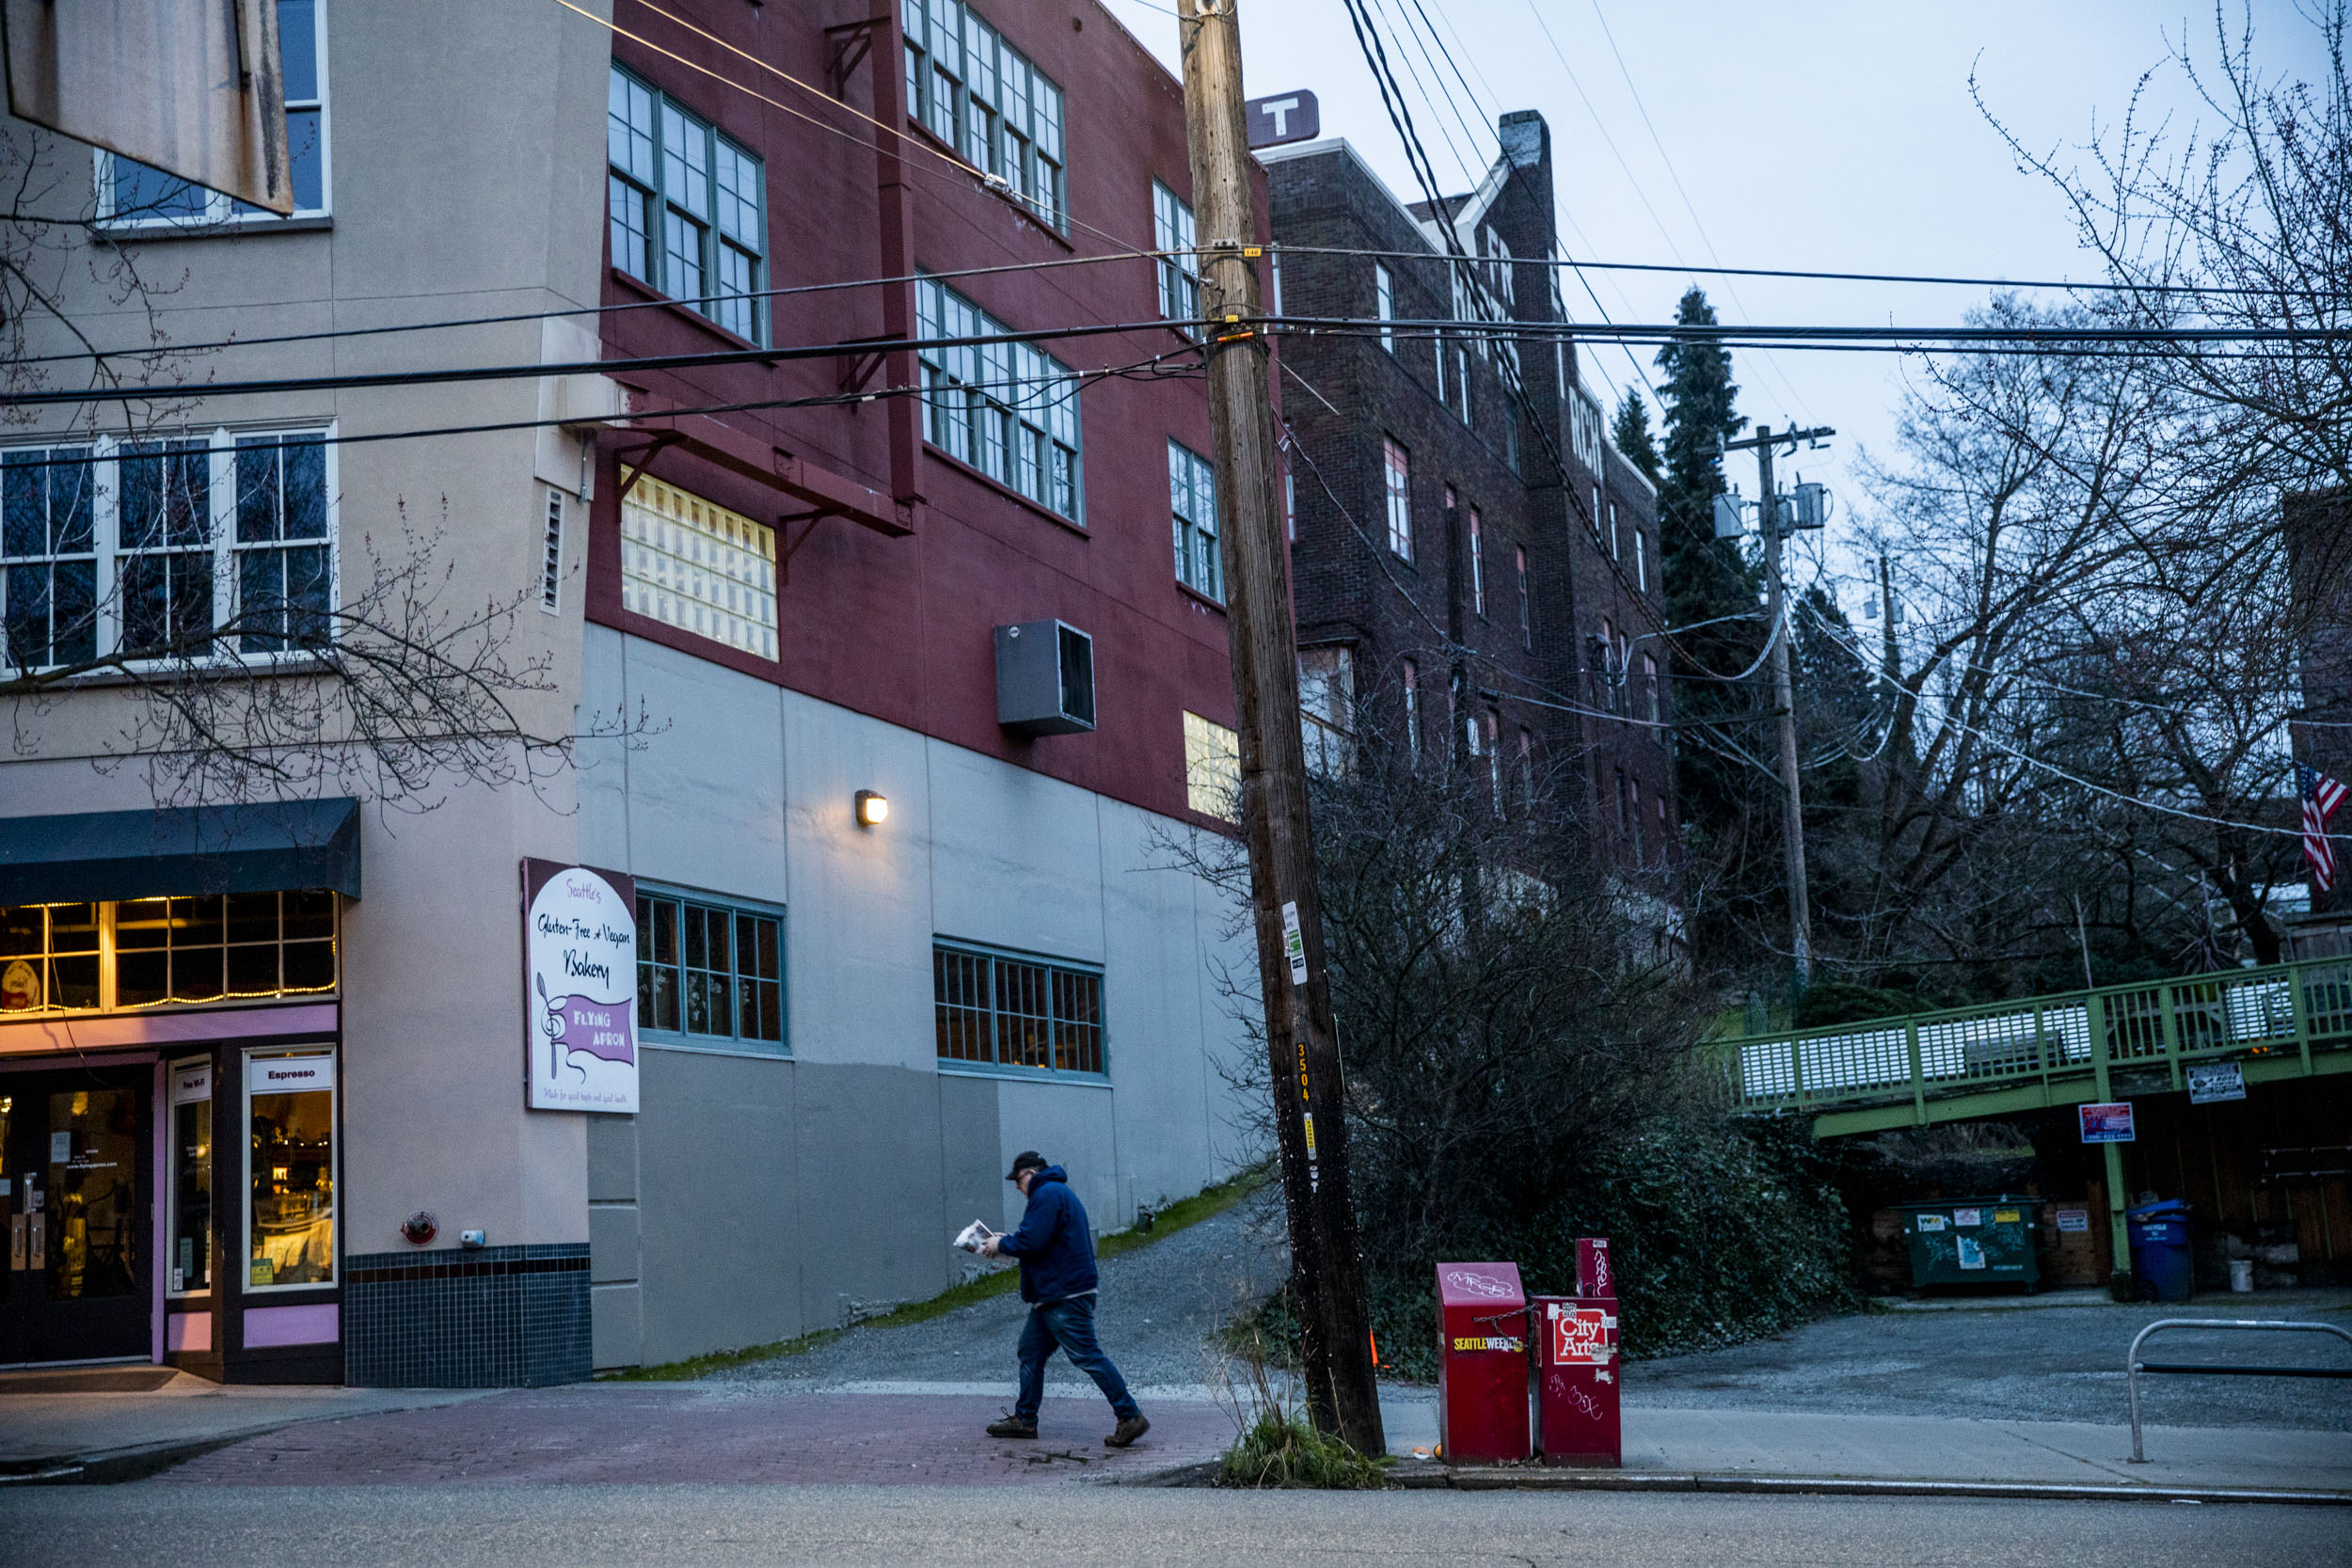 Doug Latta, 58, completes his final delivery route for the Seattle Weekly.